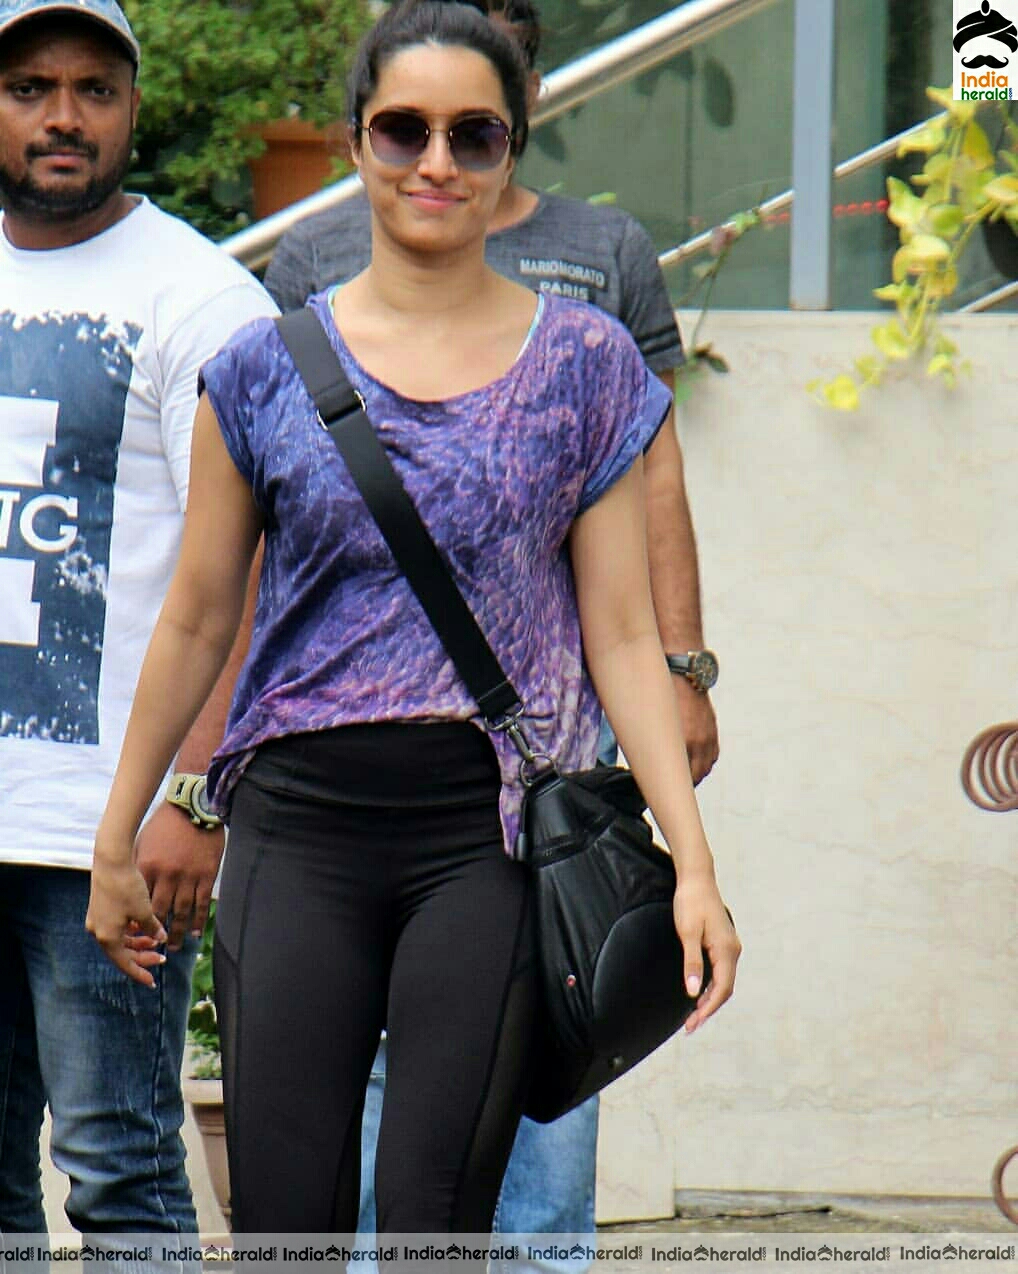 Shraddha Seen in lose top and shades